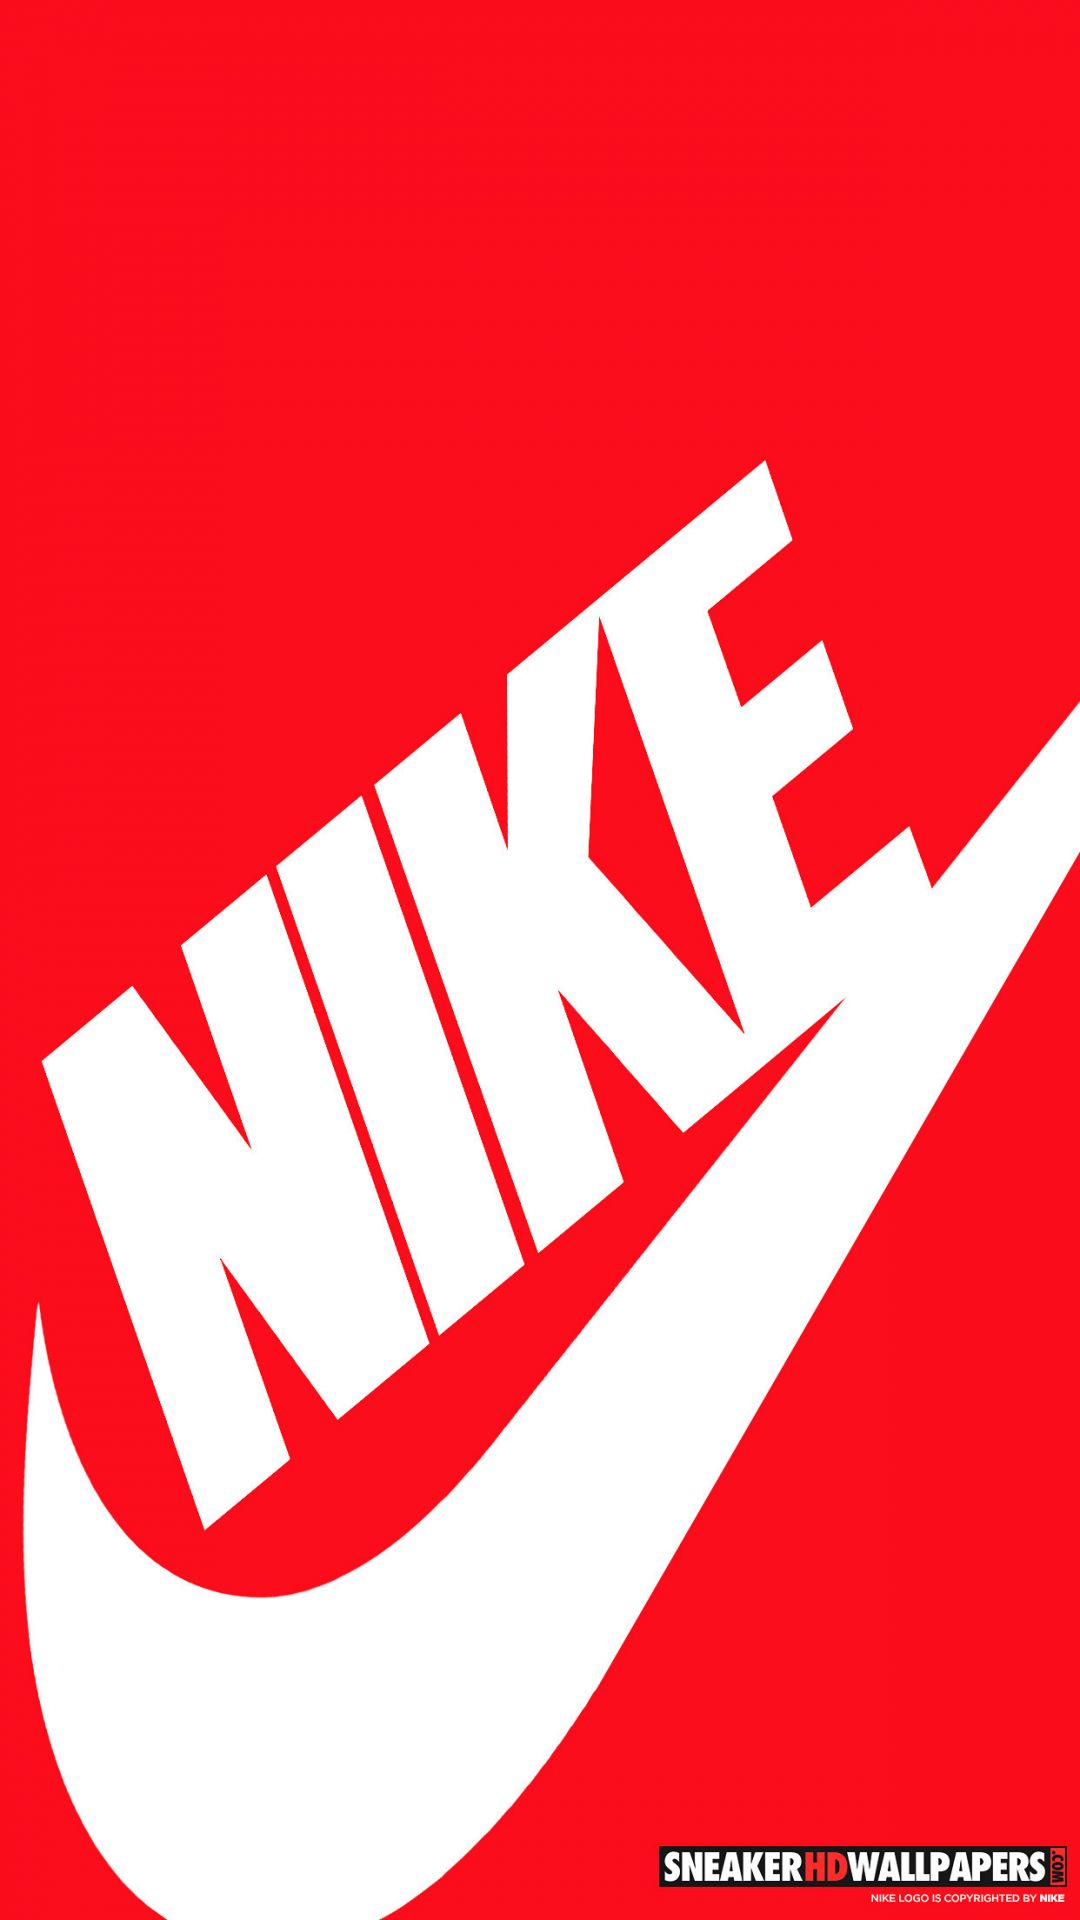 ✓[75+] Nike Wallpaper for iPhone - Android, iPhone, Desktop HD Backgrounds  / Wallpapers (1080p, 4k) (png / jpg) (2023)